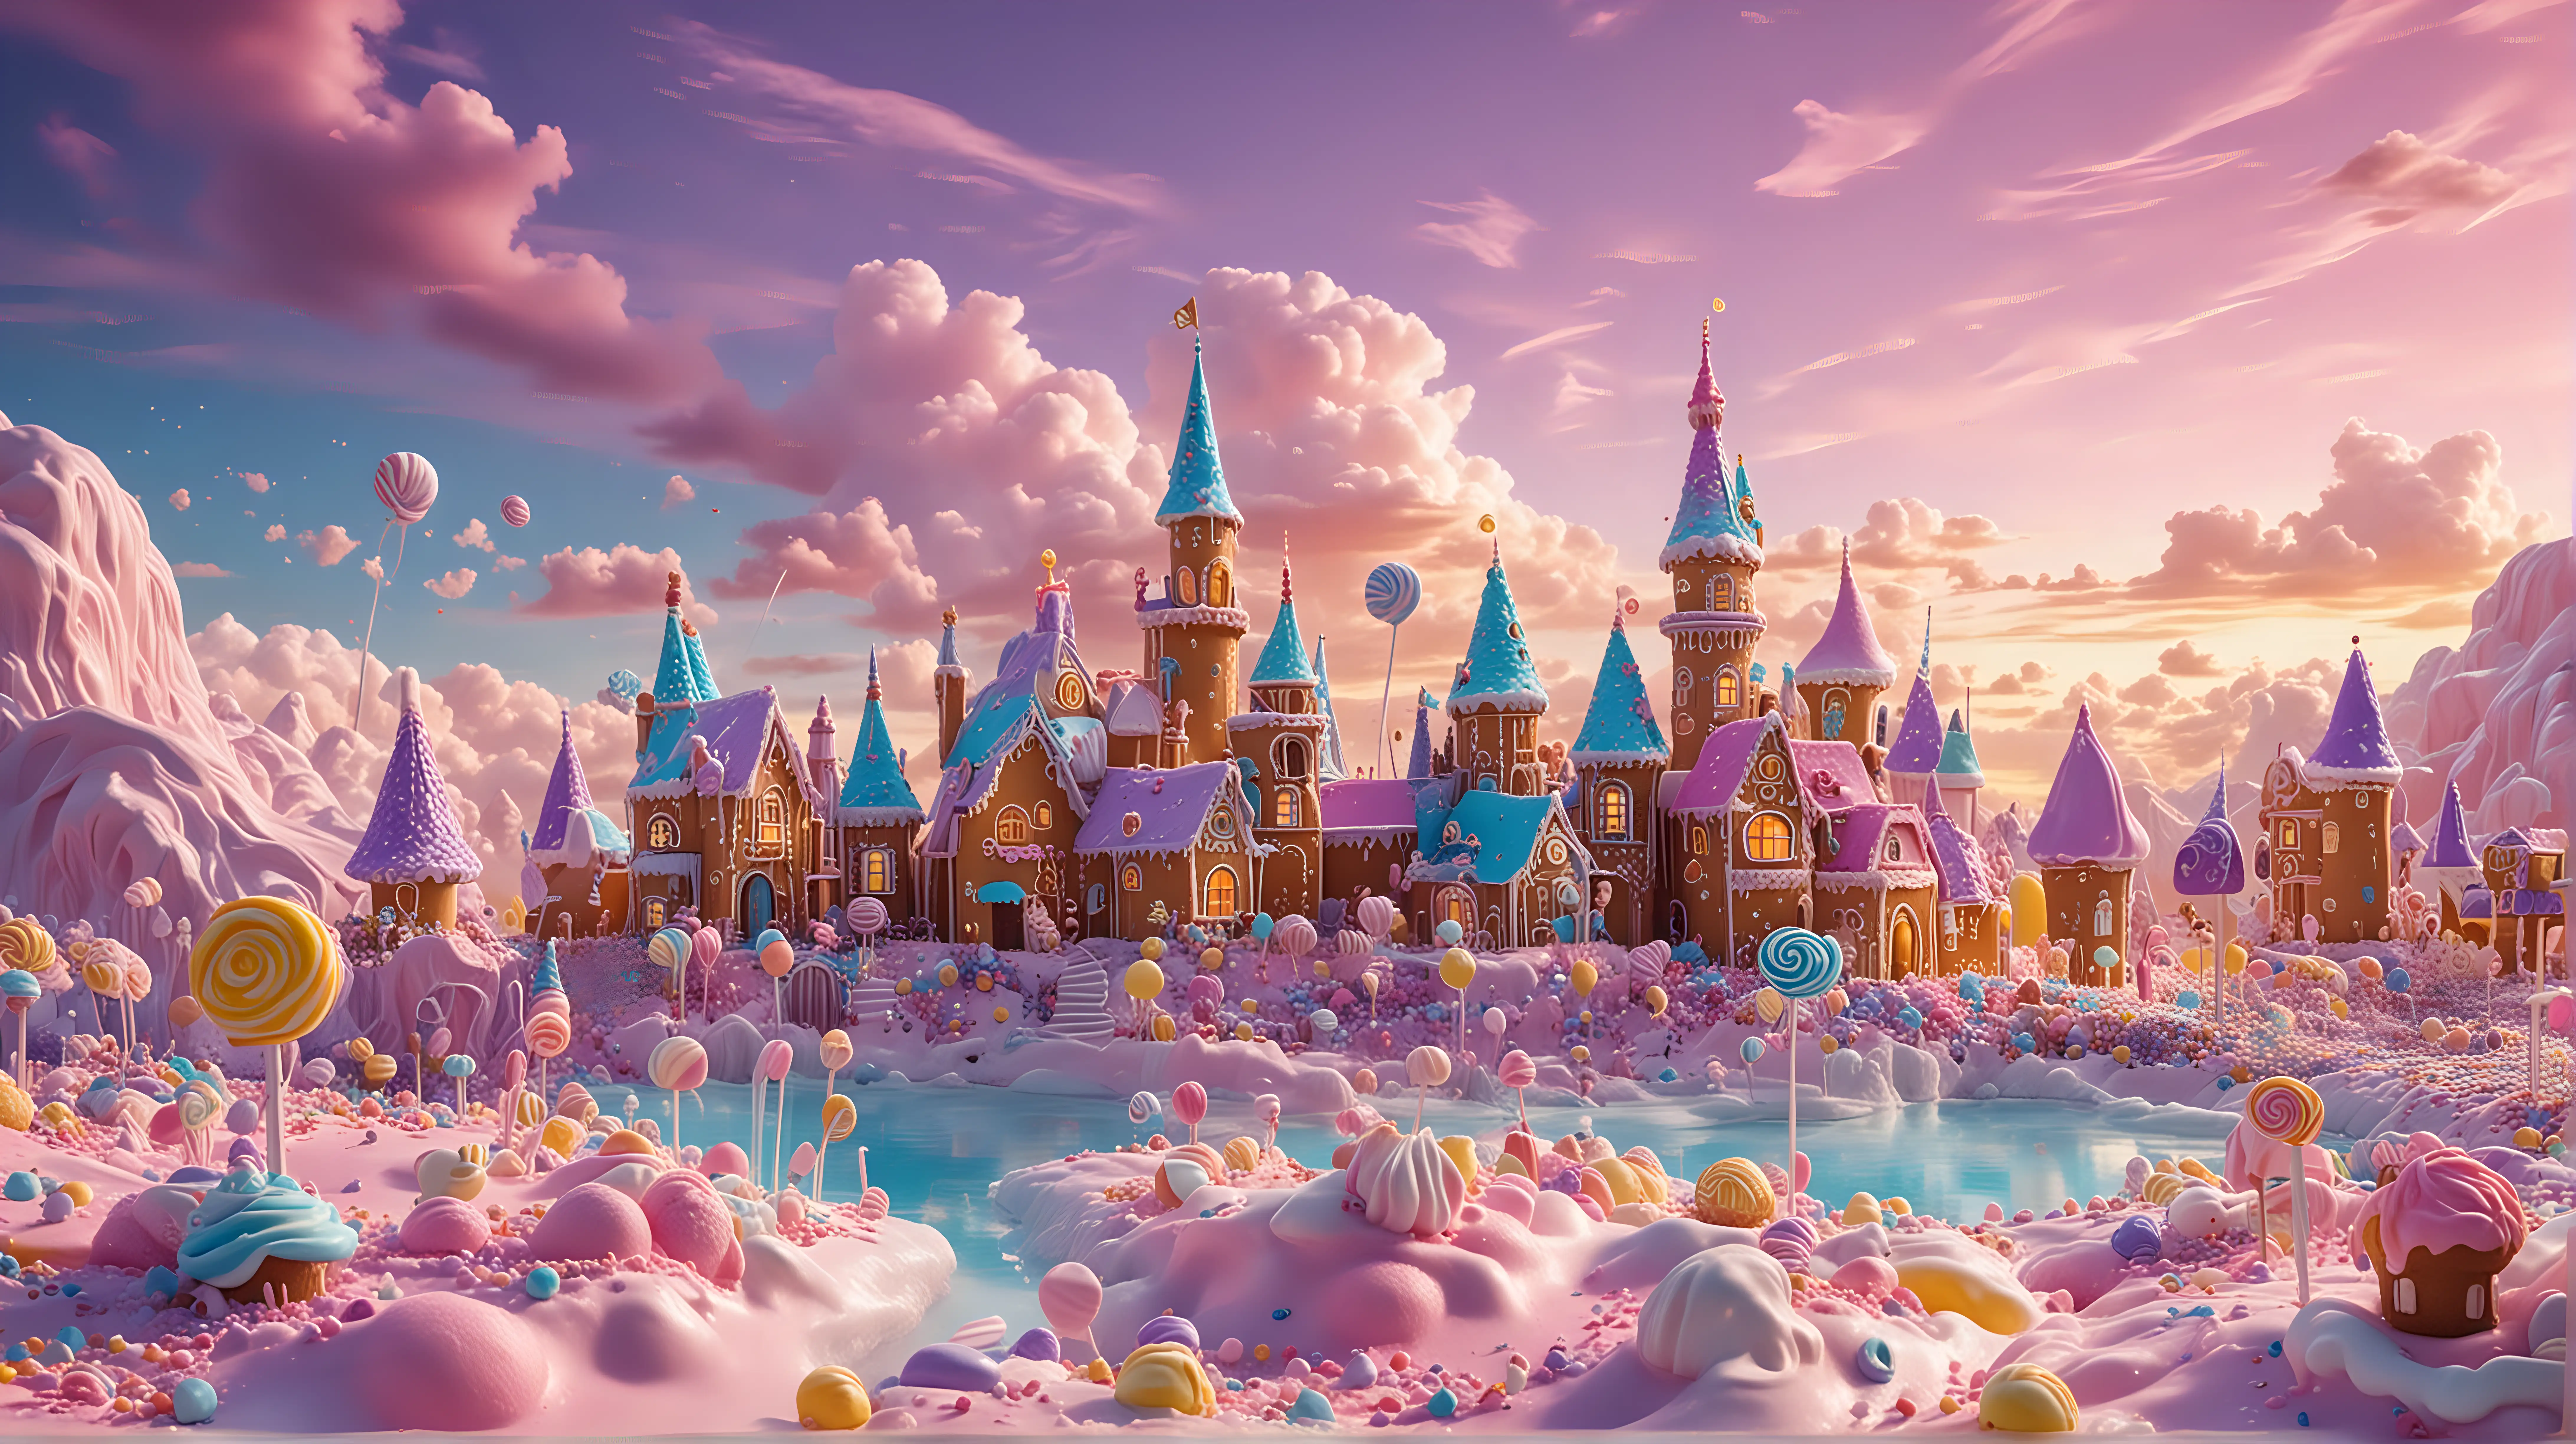 Whimsical Candy Castle and Gingerbread Town with Magical Sugar Rivers